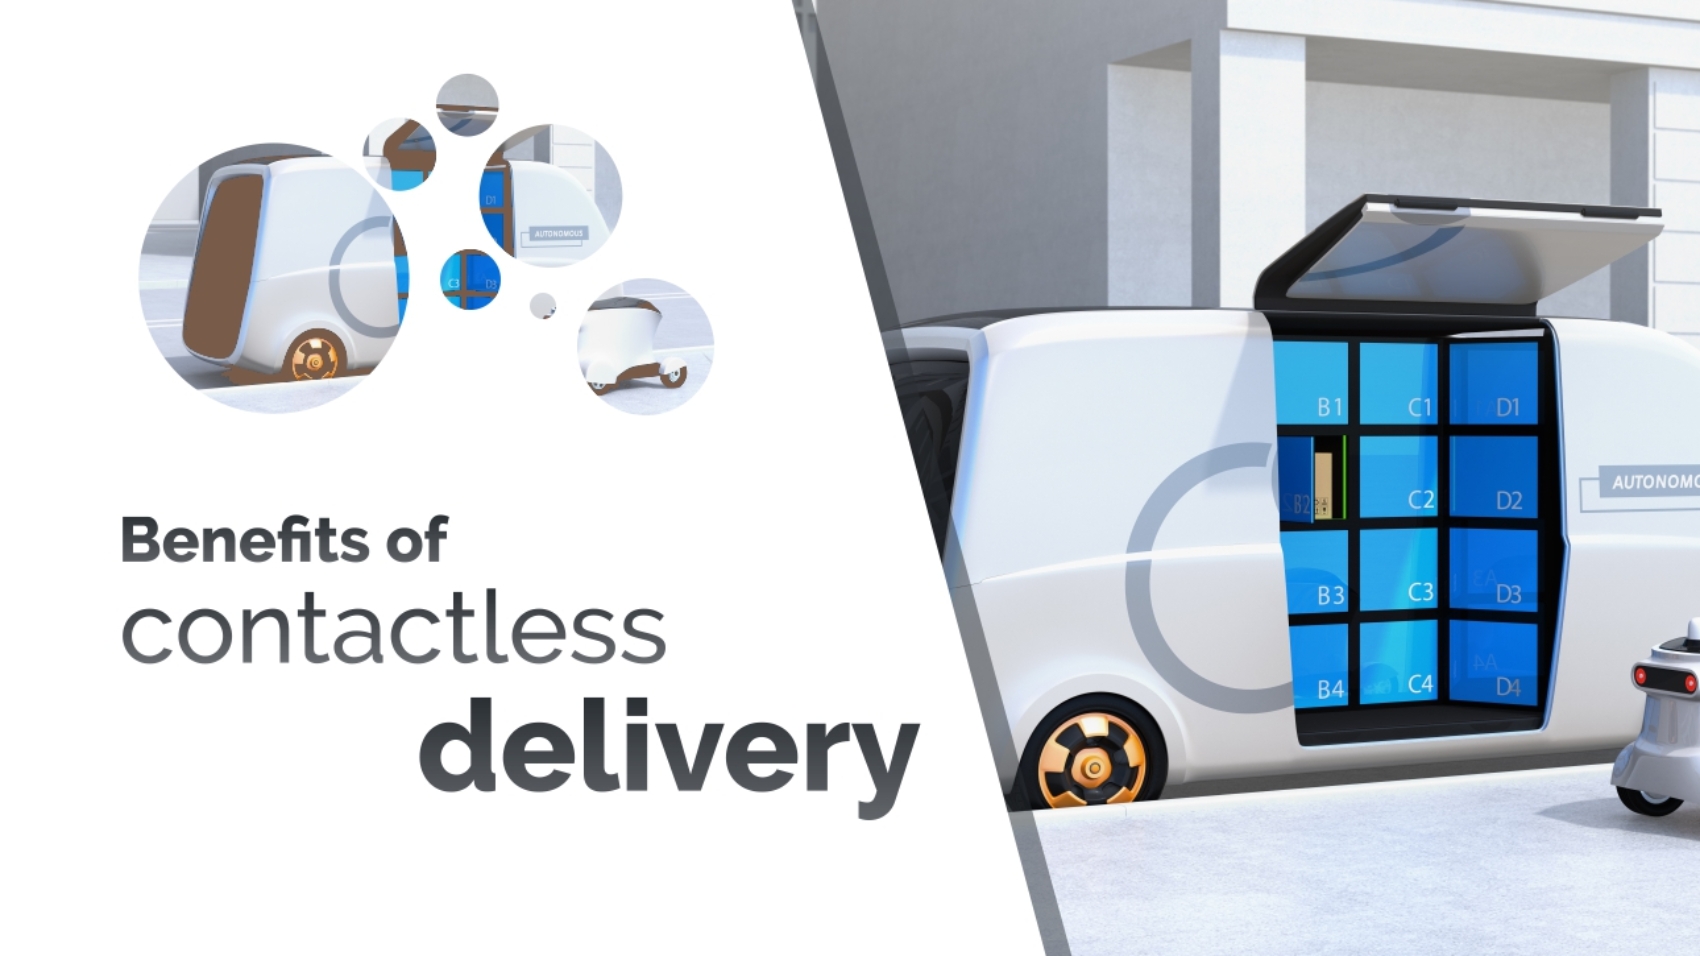 The benefits of contactless delivery